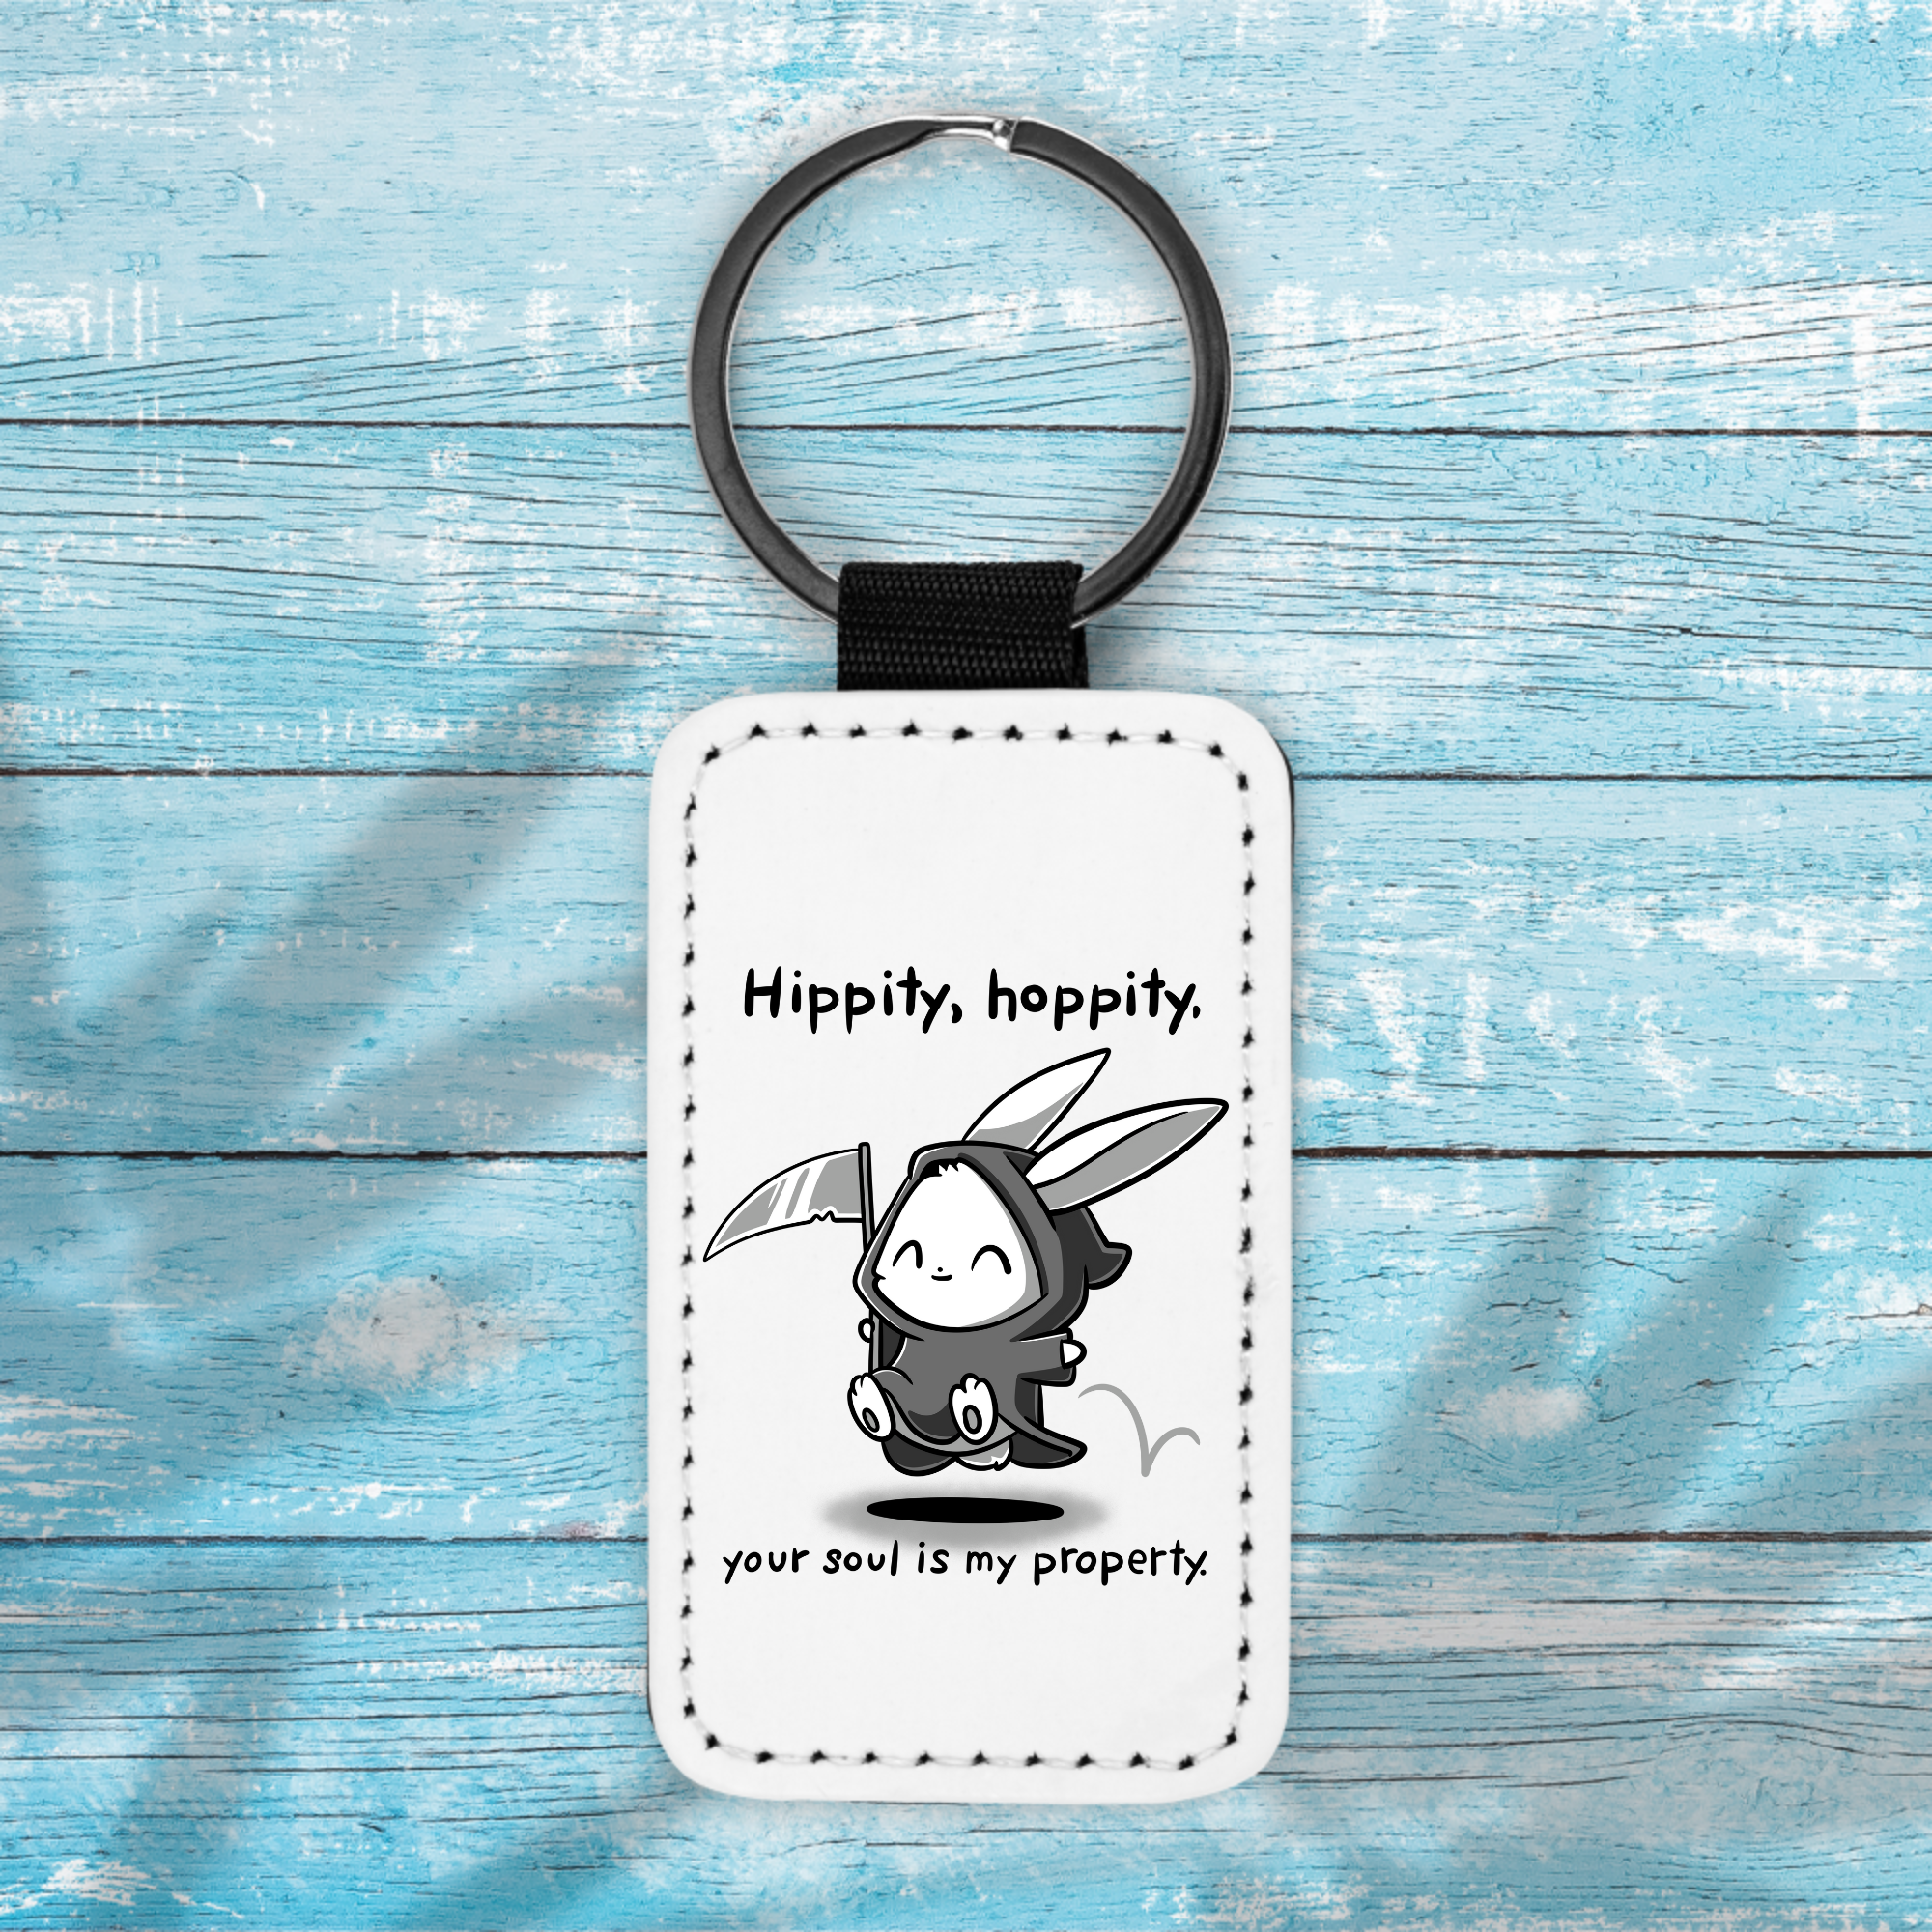 Your Soul Is My Property - Key Chain